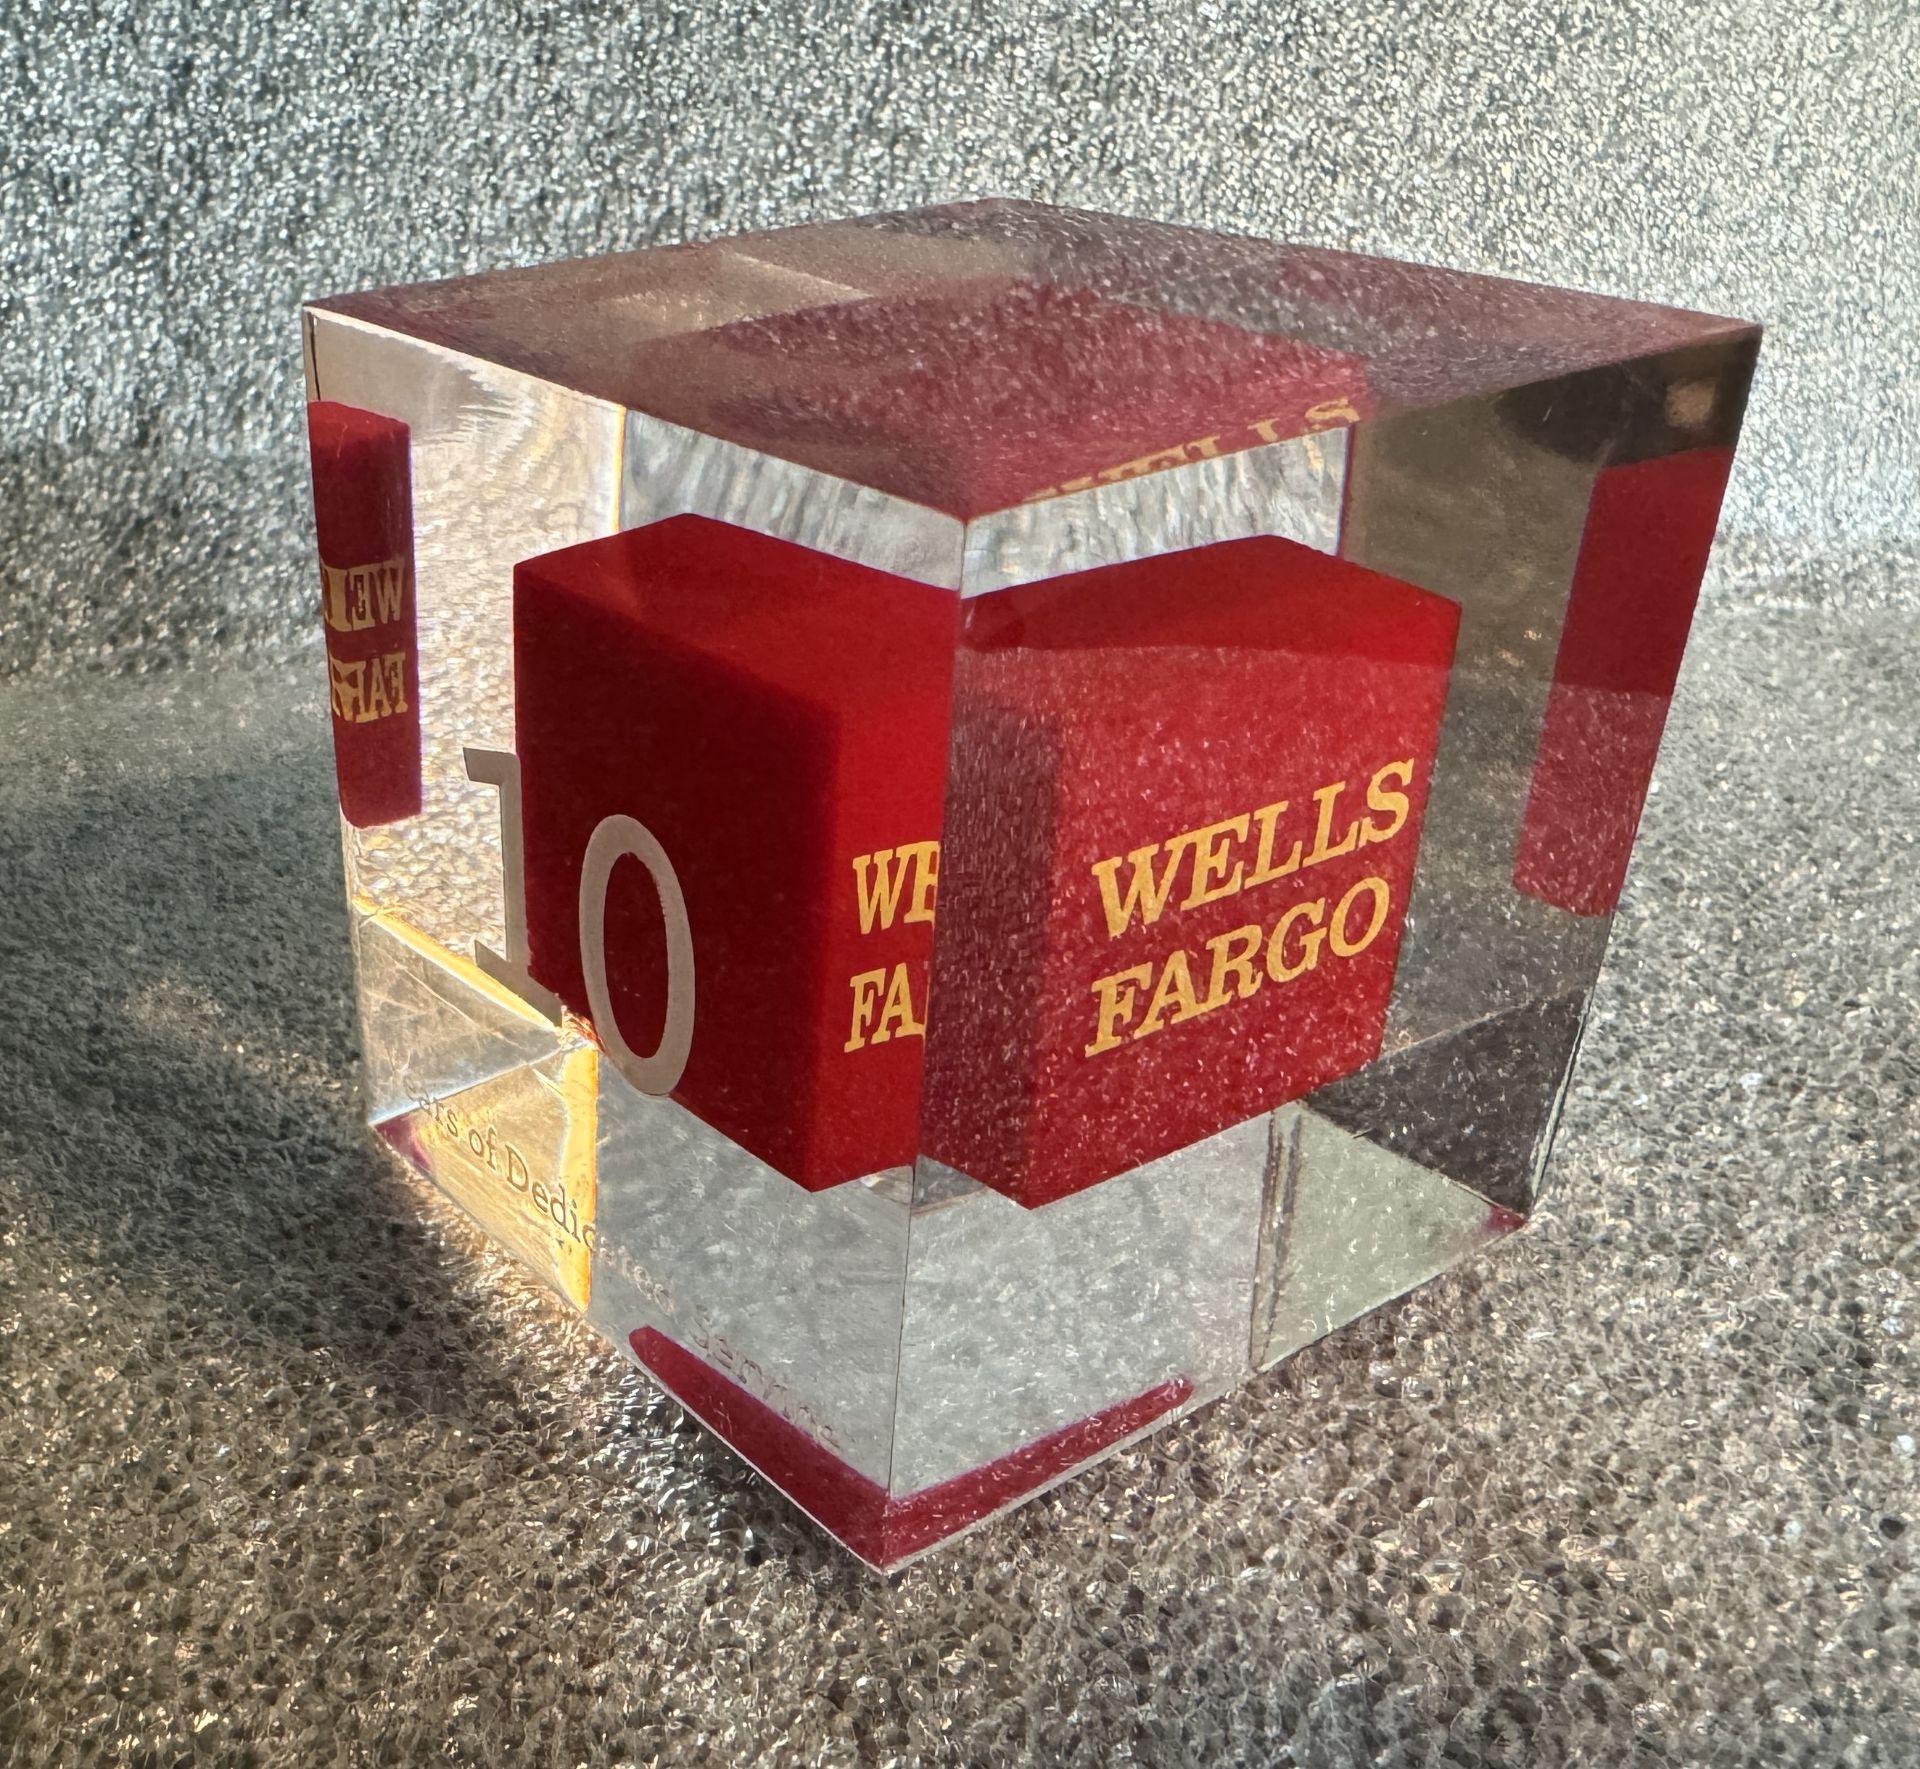 WELLS FARGO 10 YEARS OF SERVICE CUBE - Image 2 of 2